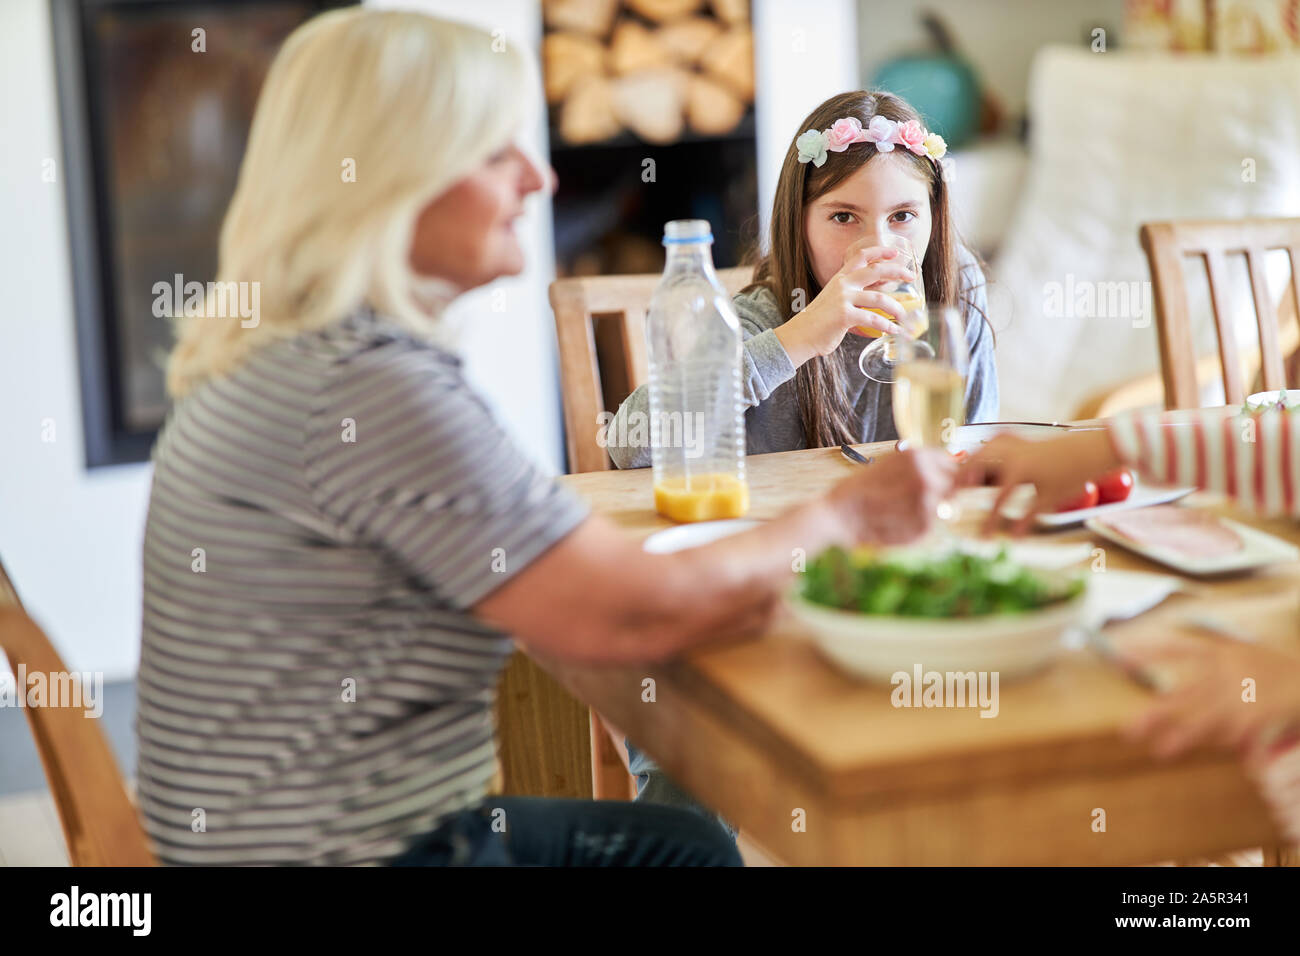 Girl is drinking a juice while having lunch with grandmother in the foreground Stock Photo